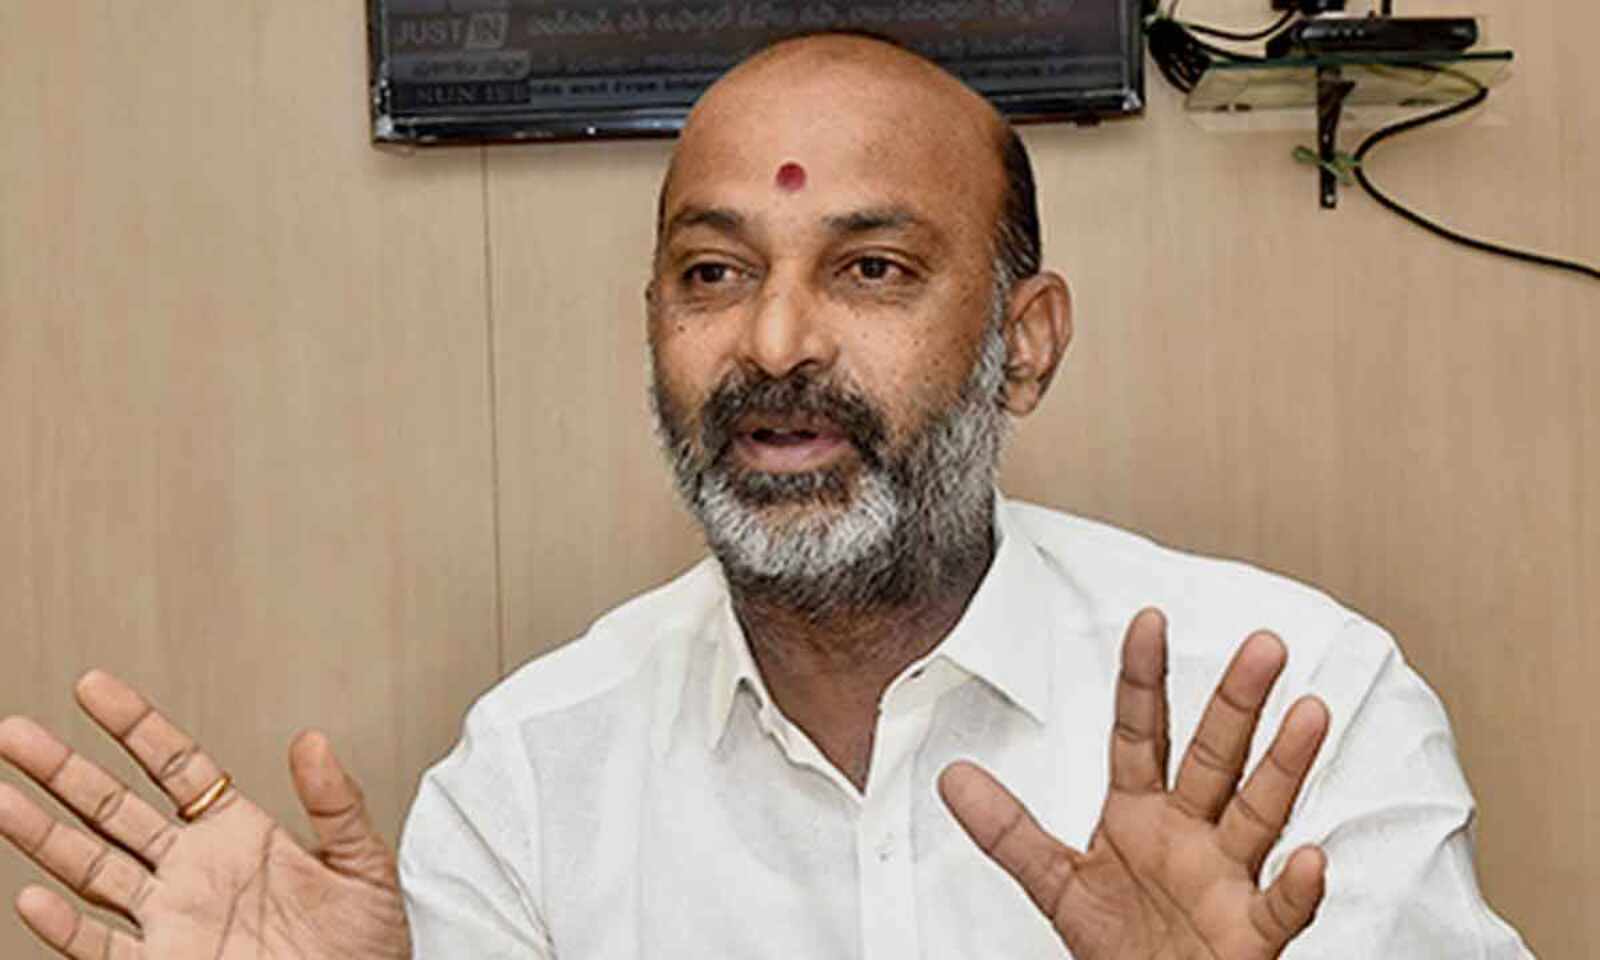 Bandi Sanjay not happy with developments in TBJP: Sources